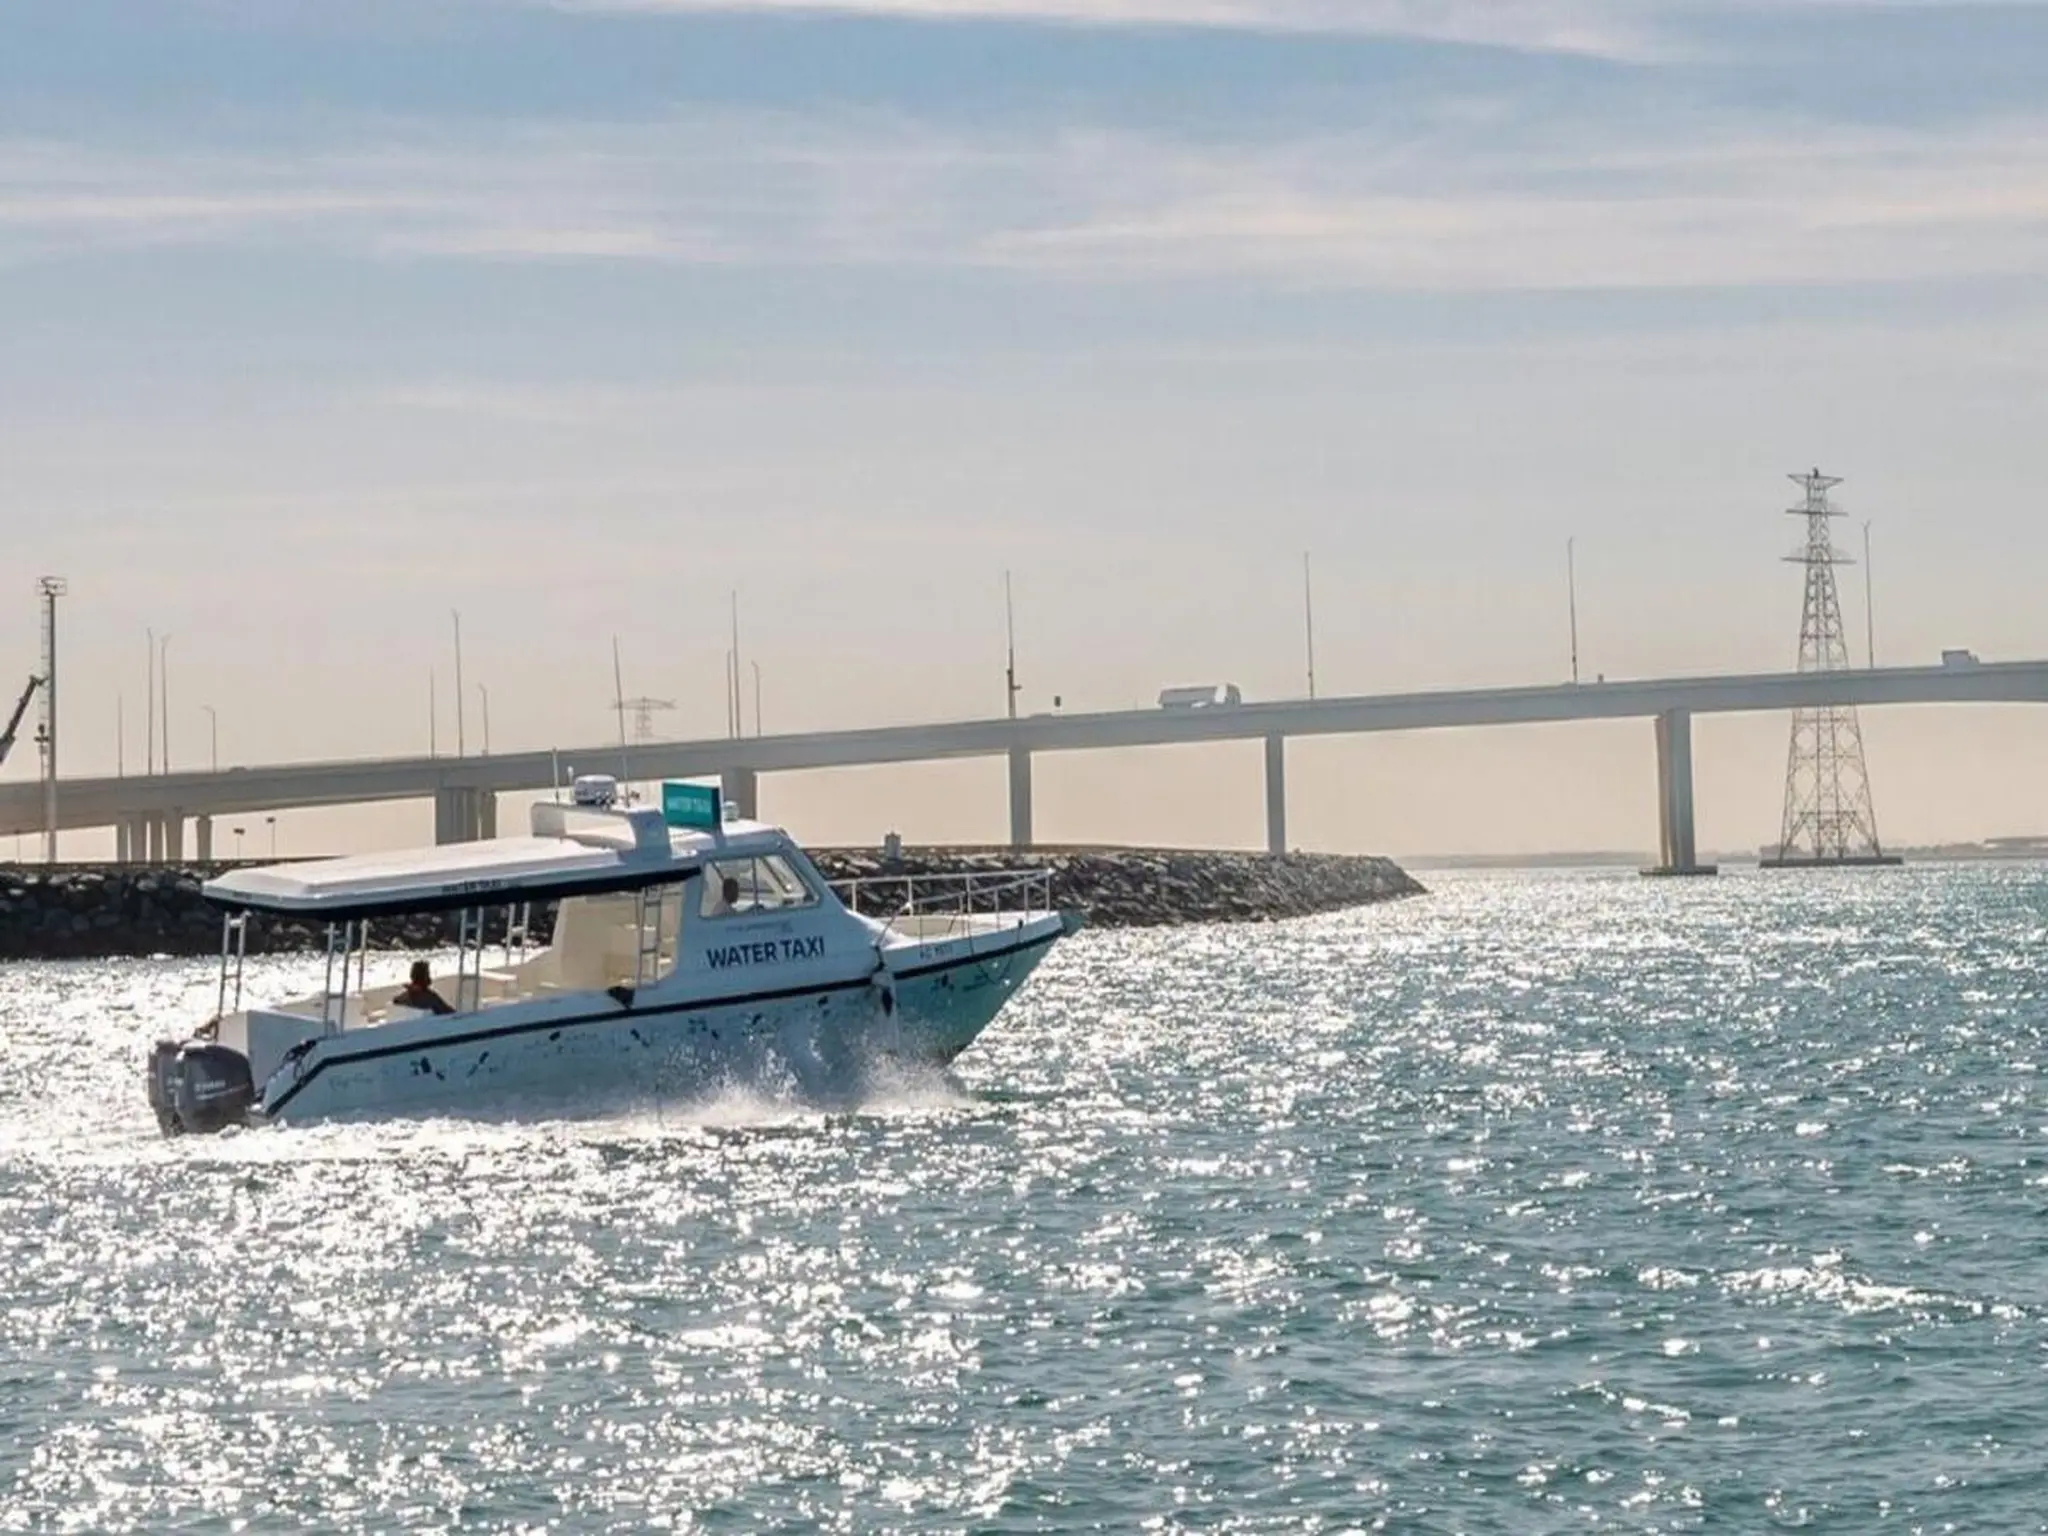 UAE Launches Driverless Water Taxis to Link Abu Dhabi with Nearby Islands